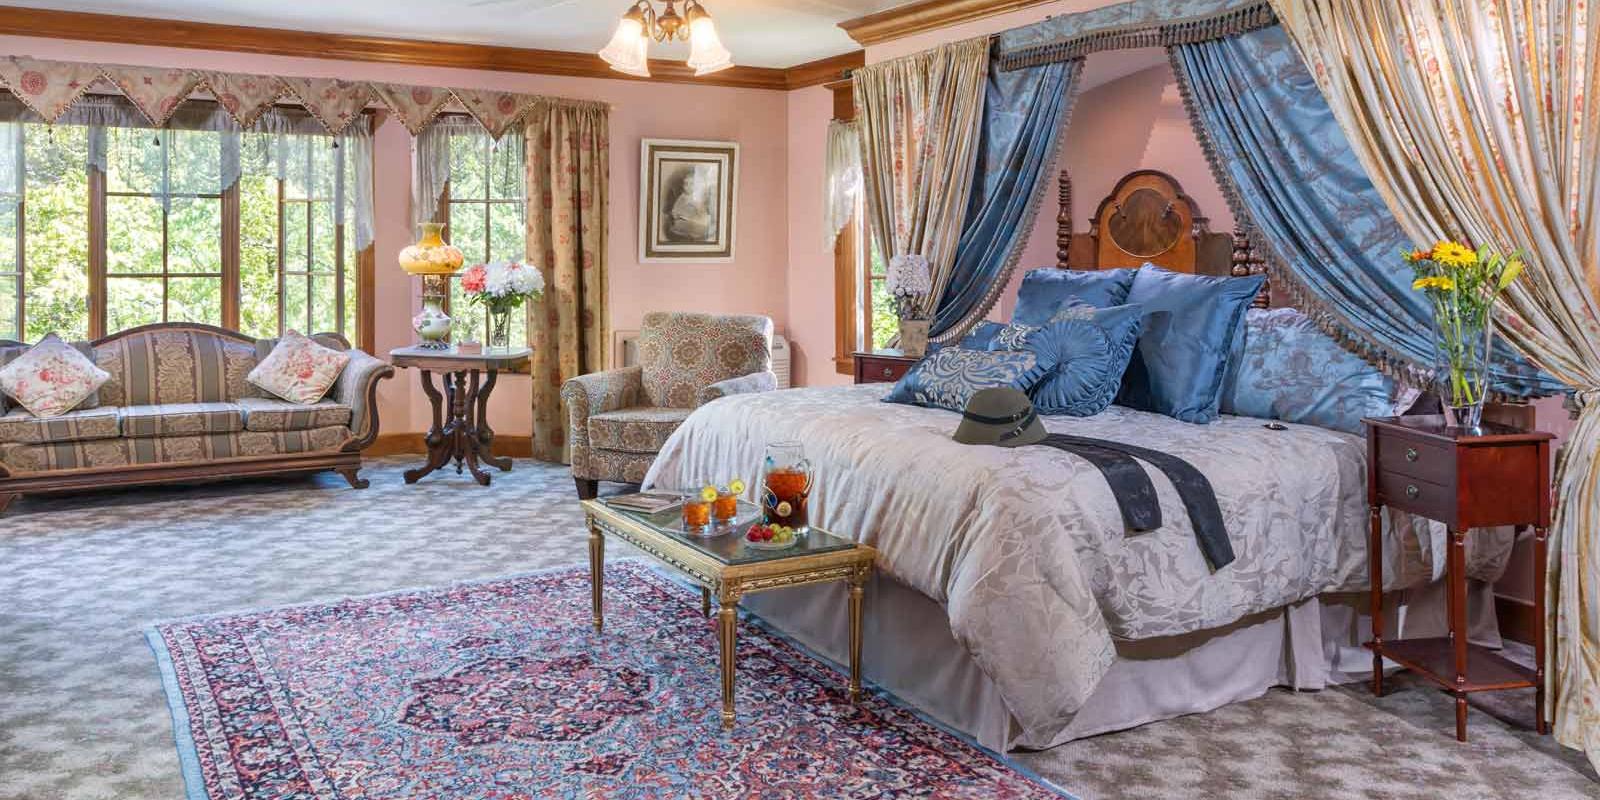 #1 Hotels in Eureka Springs AR | The Angel Suite at The Angel at Rose Hall